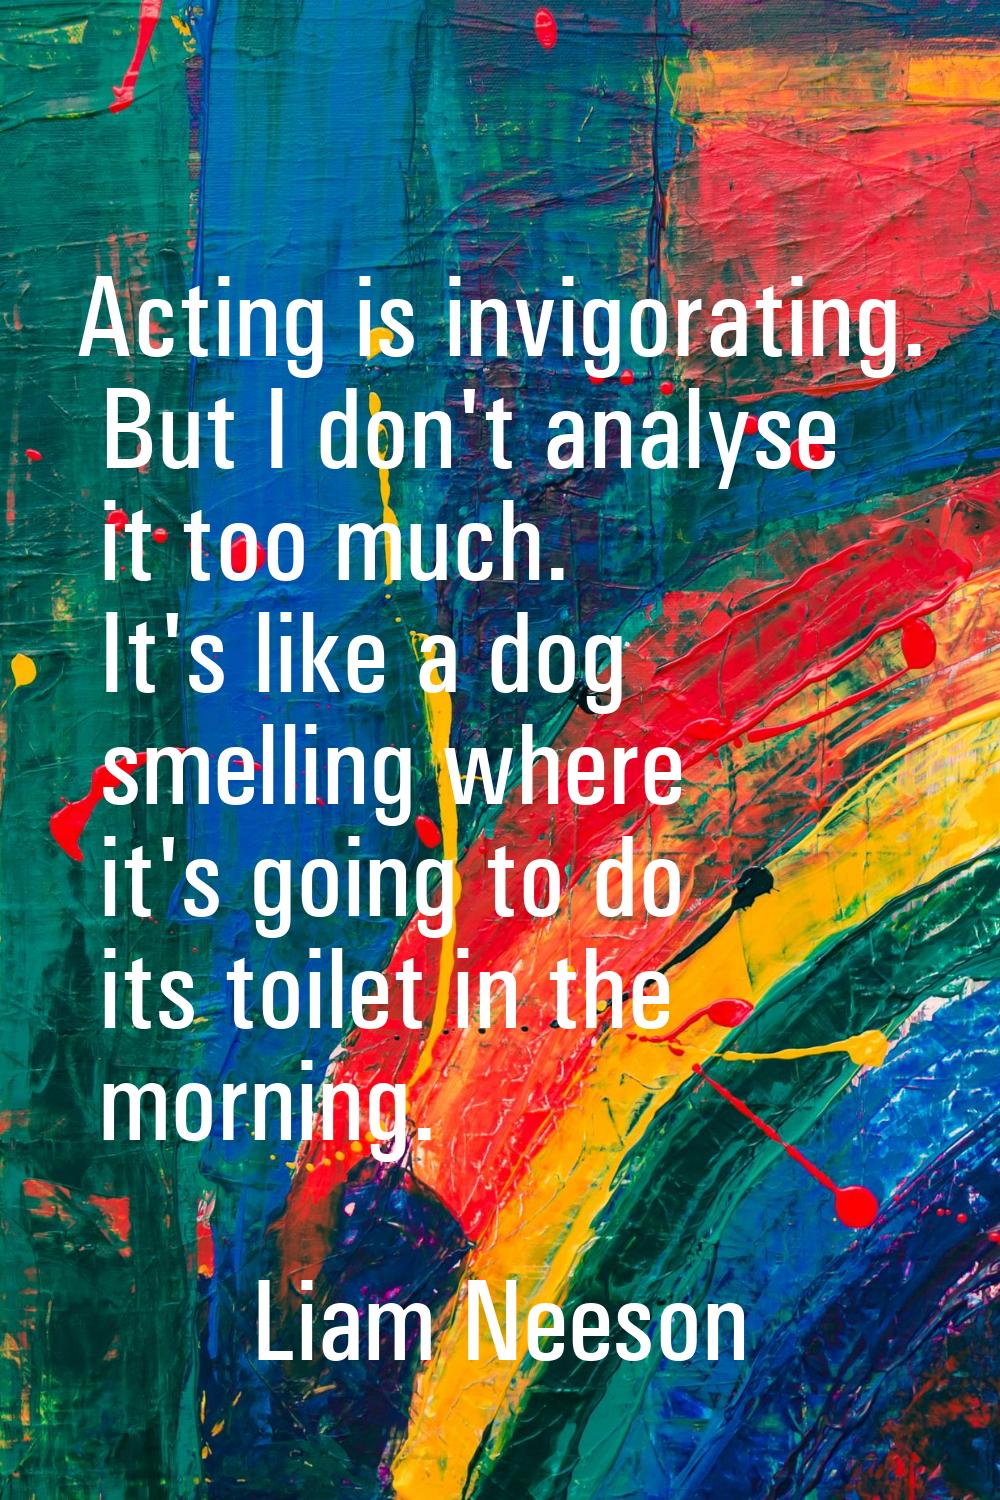 Acting is invigorating. But I don't analyse it too much. It's like a dog smelling where it's going 